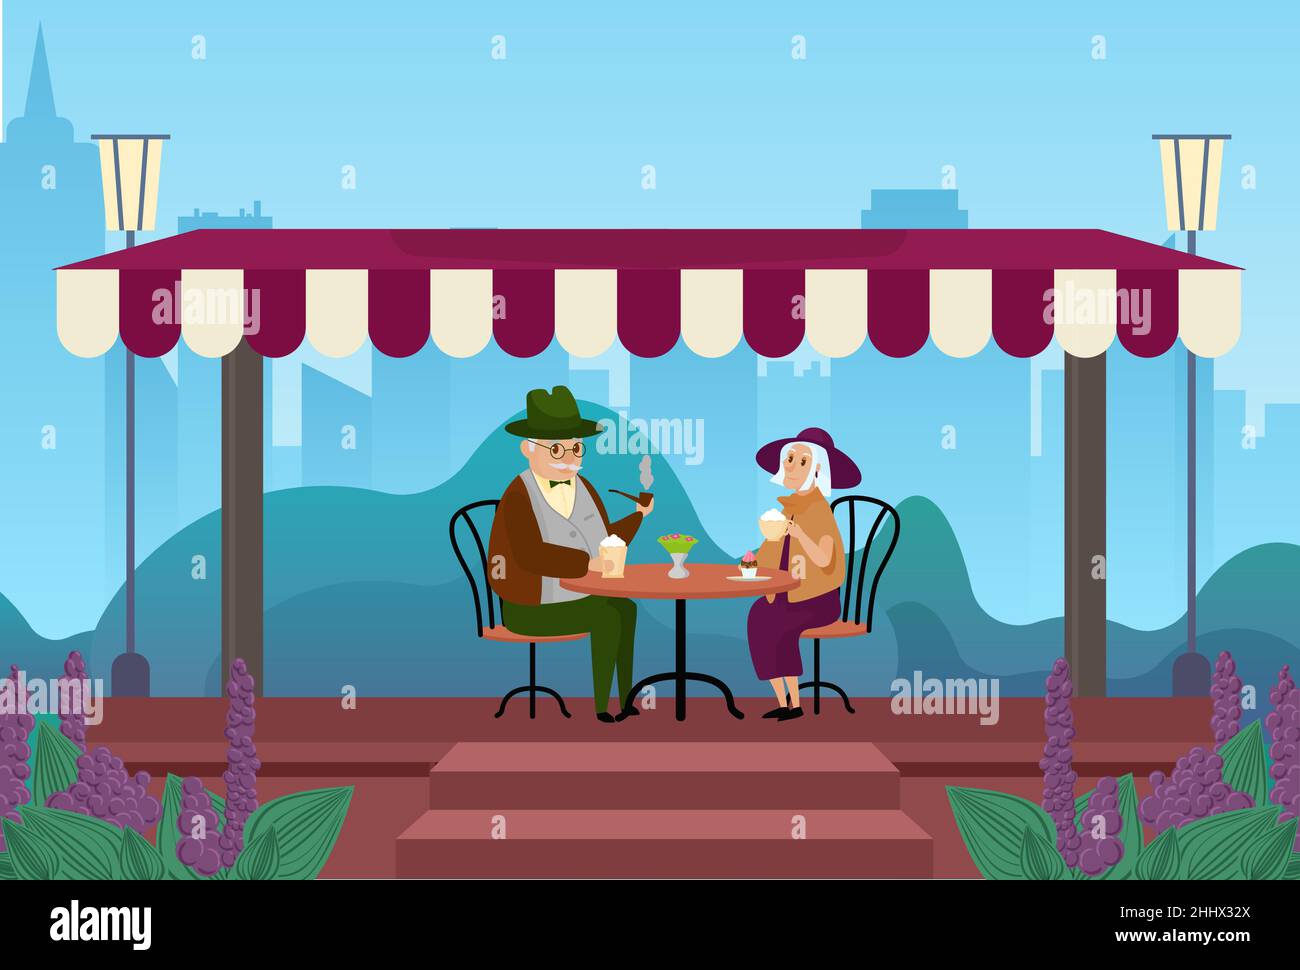 Elderly couple people drink coffee together in city street outdoor cafe vector illustration. Cartoon senior man woman characters meeting, drinking cof Stock Vector